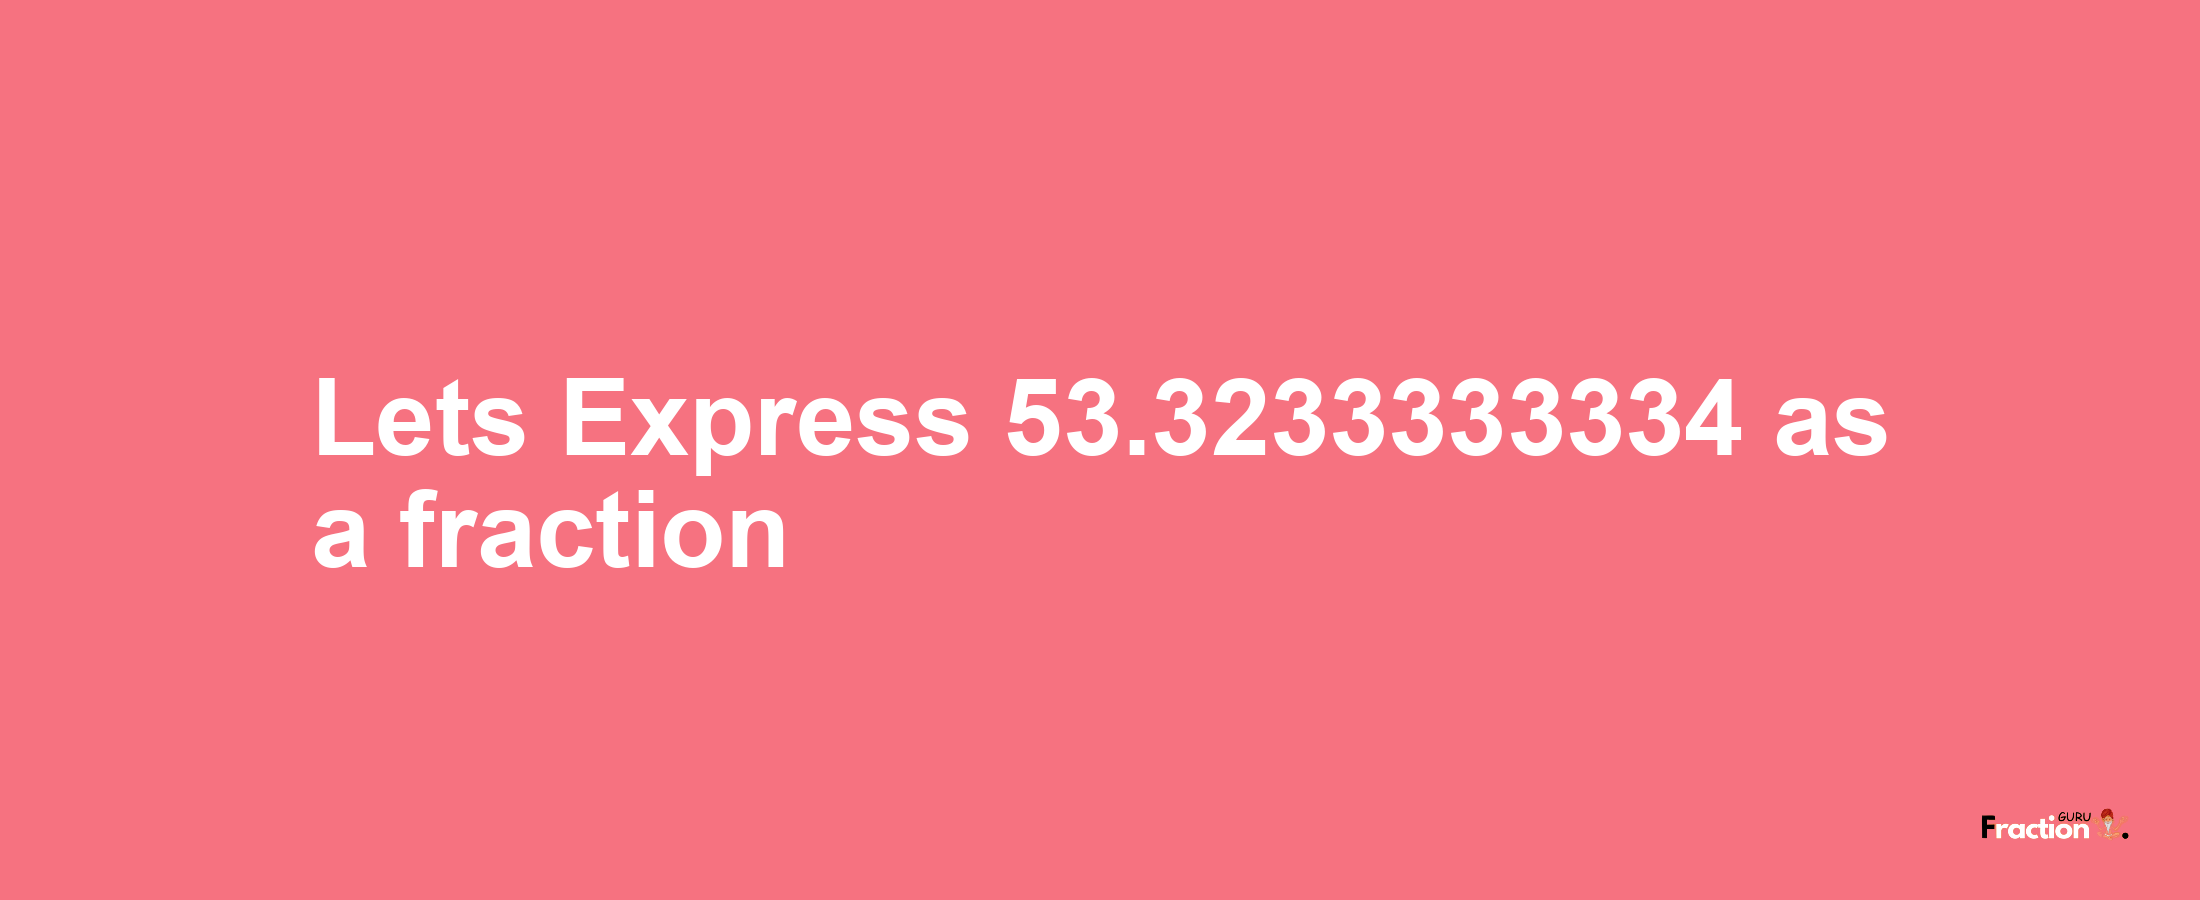 Lets Express 53.3233333334 as afraction